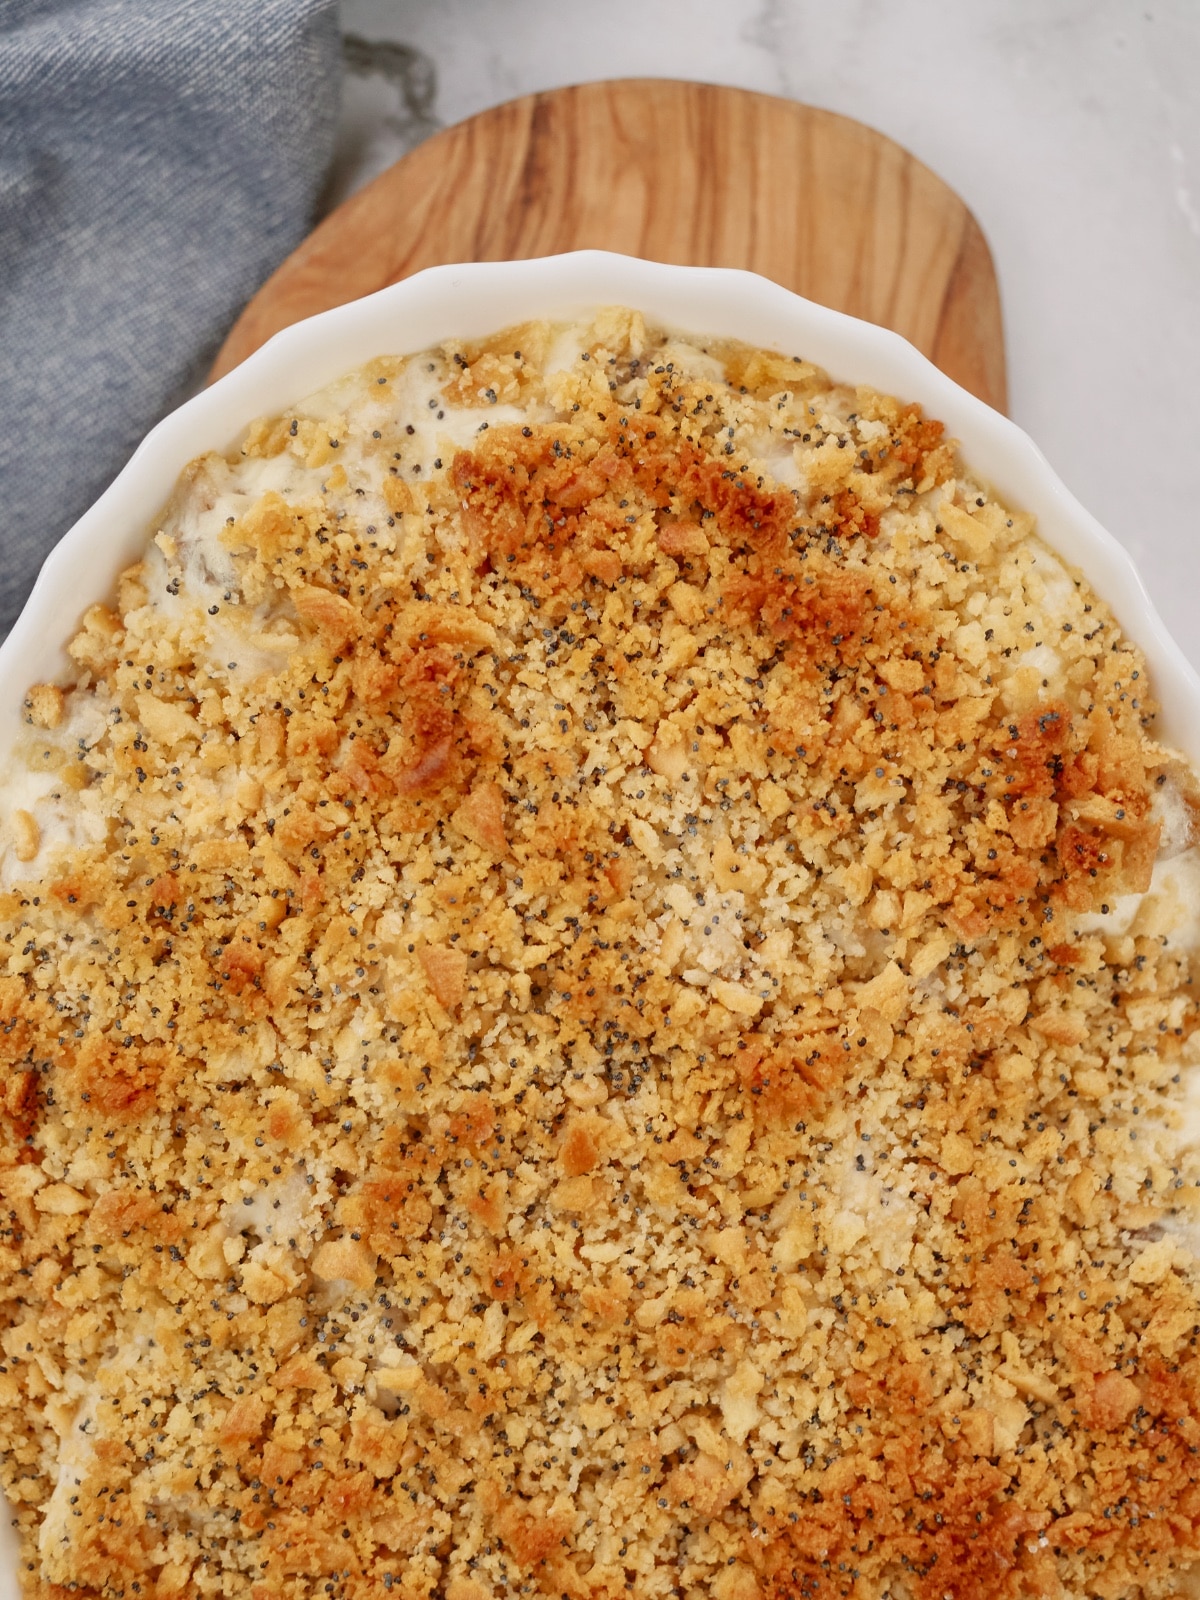 chicken and poppy seed casserole in a baking dish